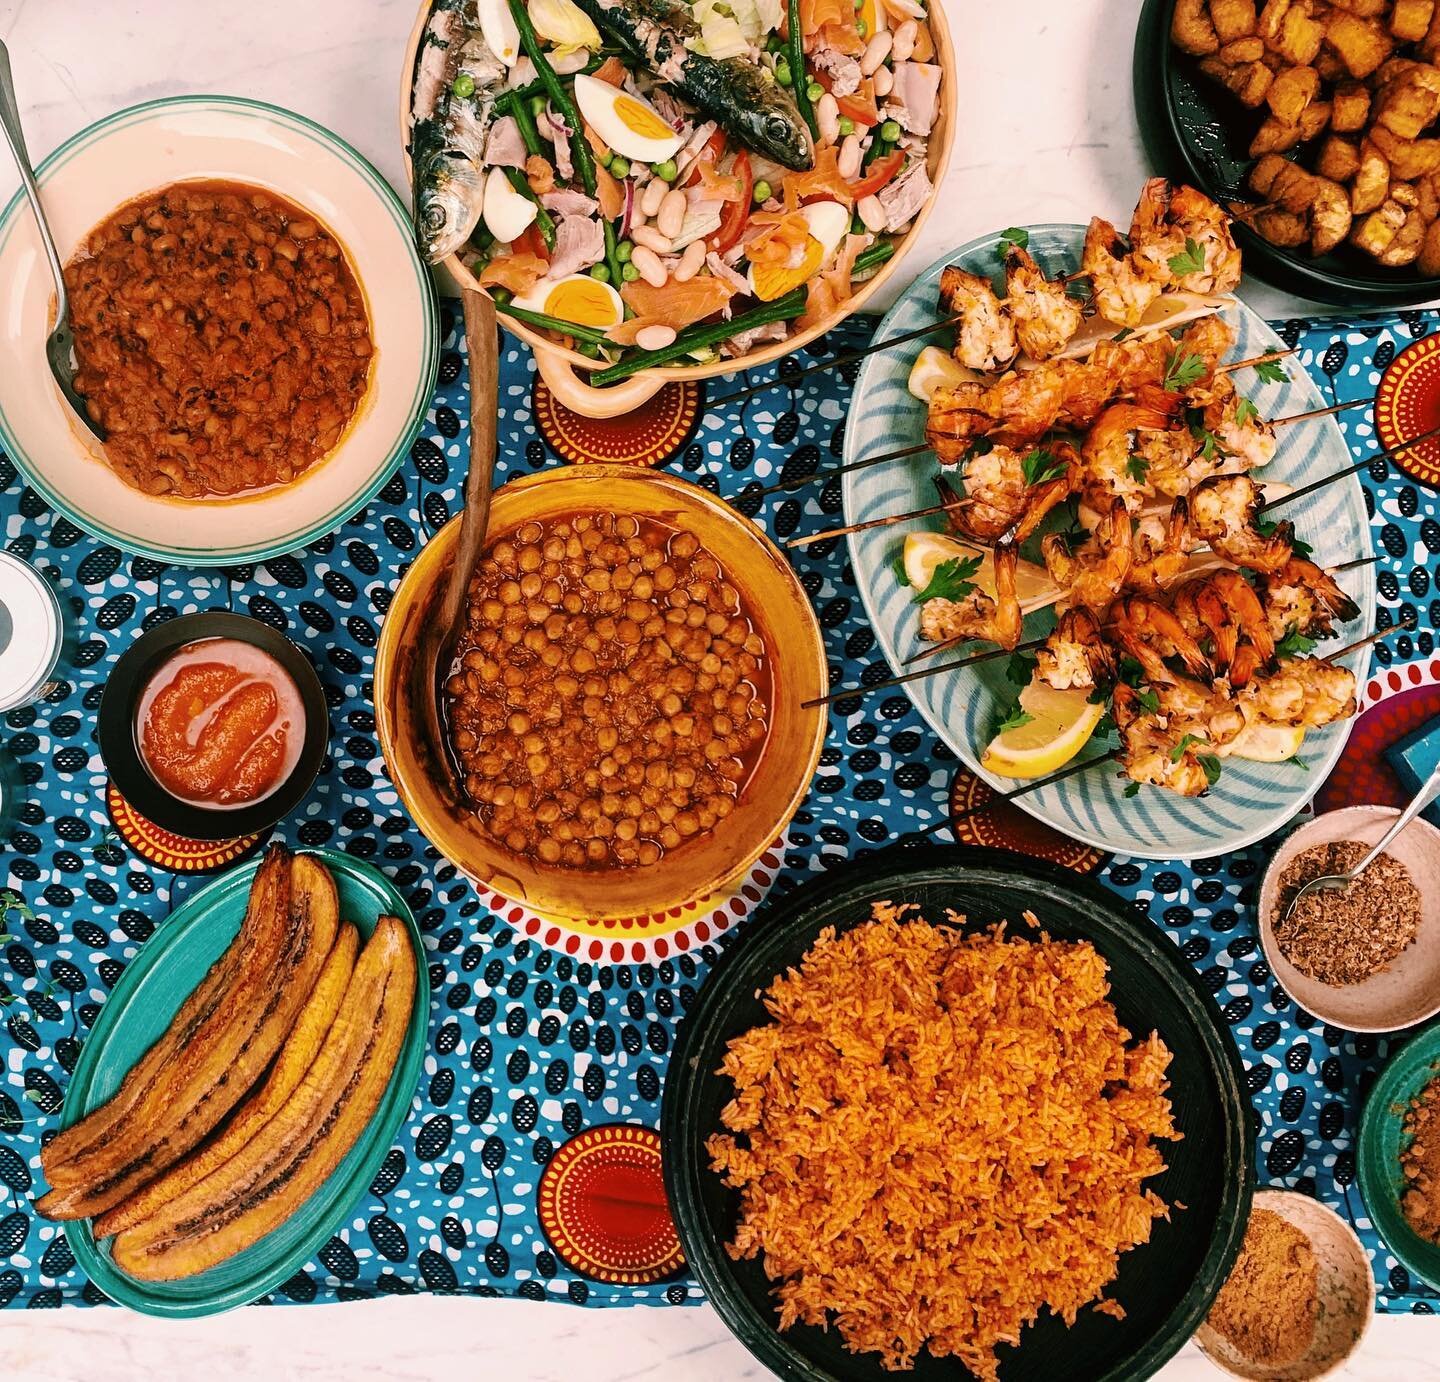 The Sunday spread🤩

Jamestowns prawns 🦐 
Jollof rice 🍚 
Ghana salad 🥗 
Red Red &amp; Bambara bean stew🫘
Kelewele &amp; simple fried plantain🍌

All of these delicious recipes are available in the cookbook📙🇬🇭